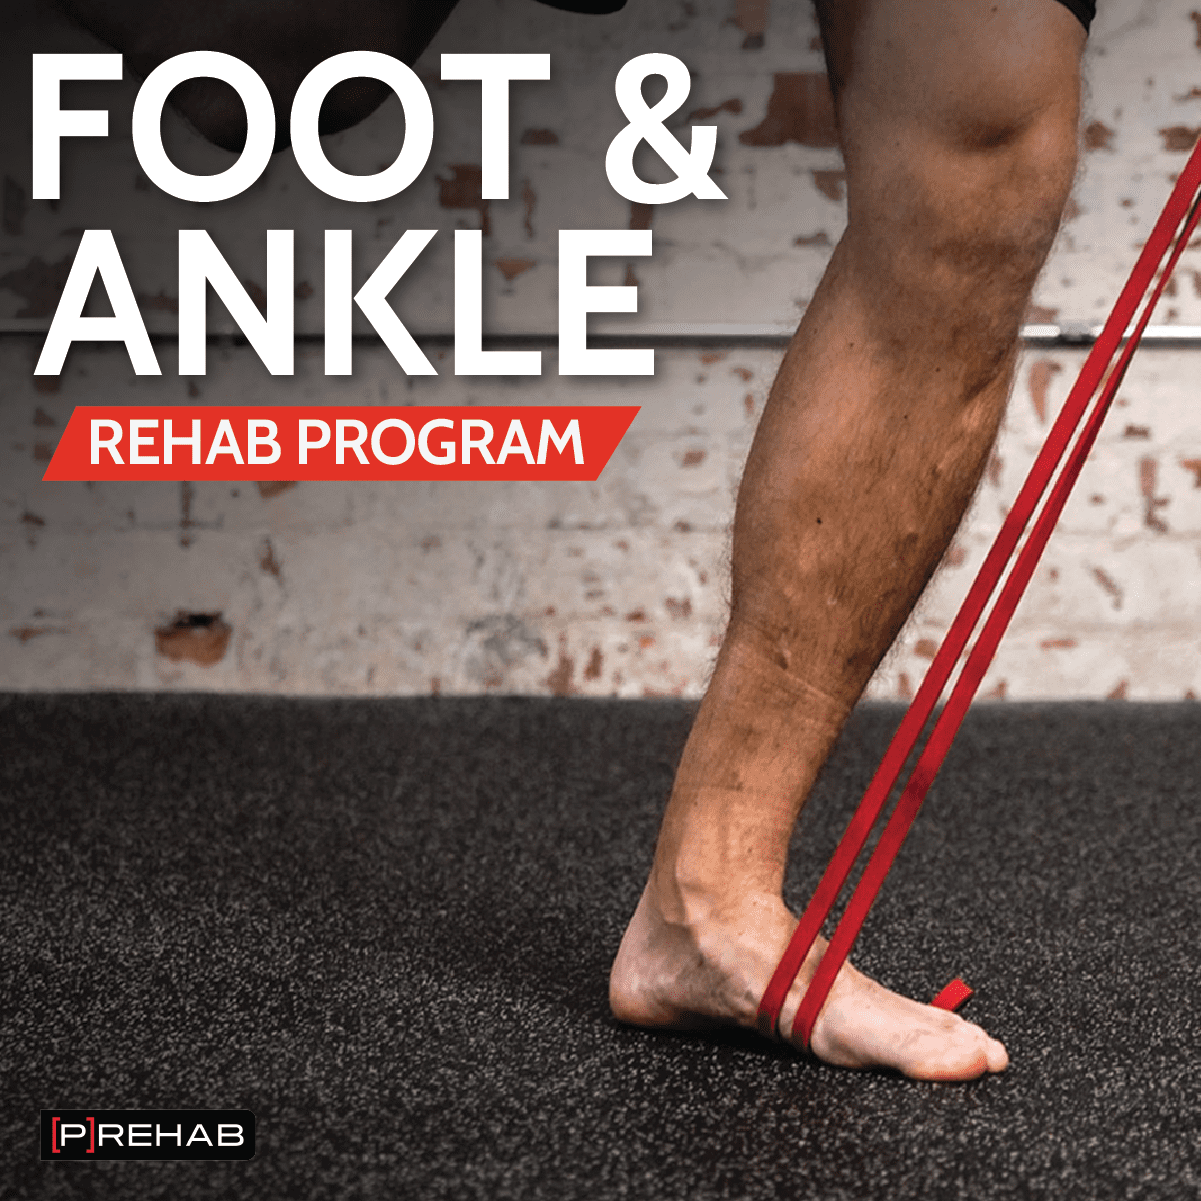 https://theprehabguys.com/wp-content/uploads/2022/08/Foot-Ankle-REHAB.png